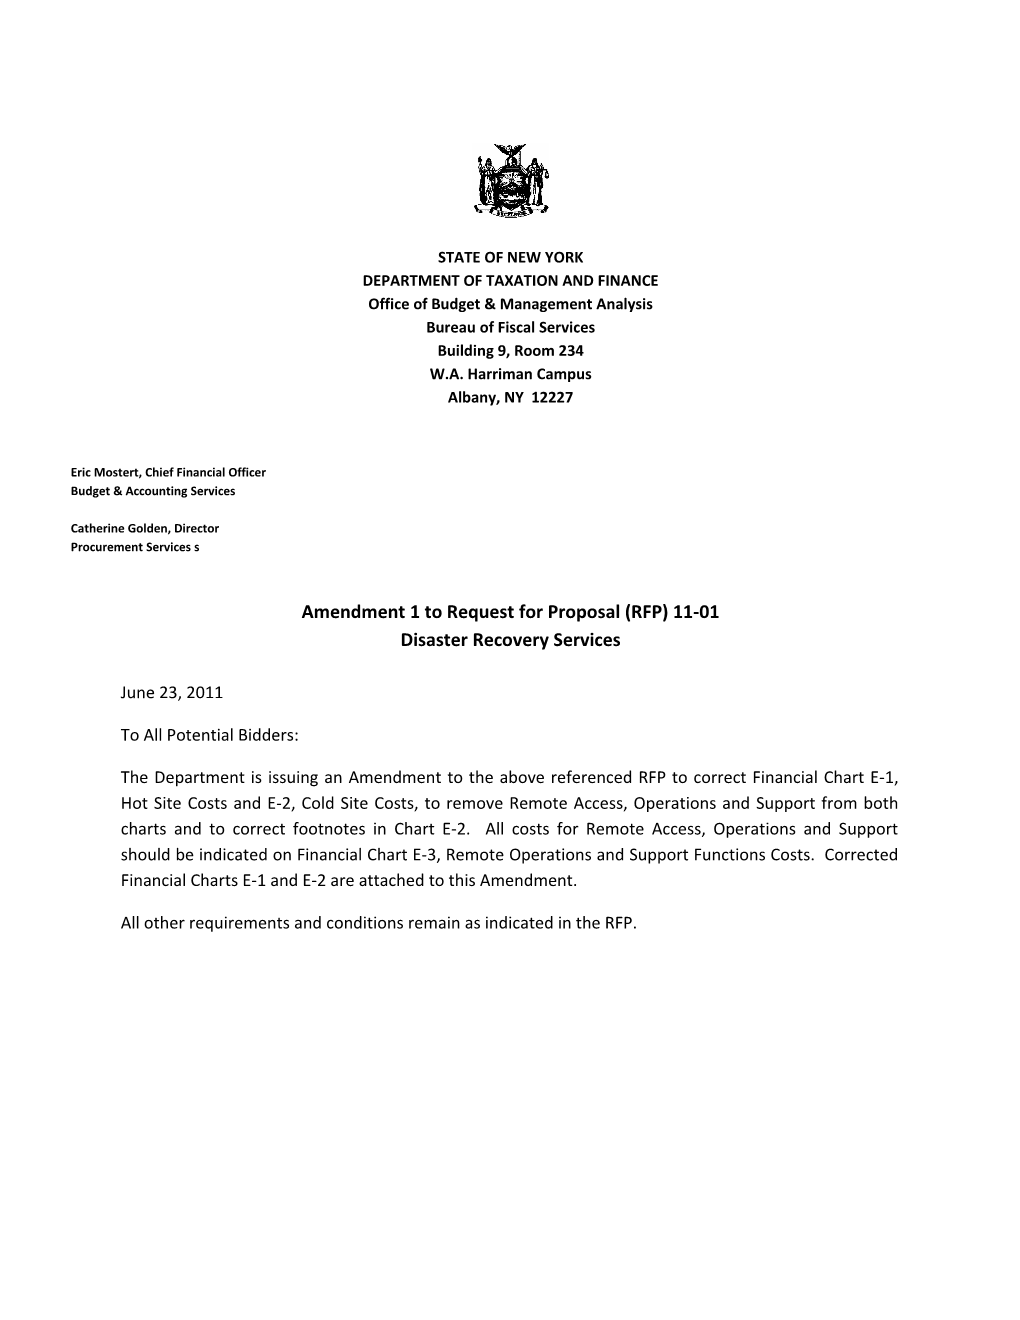 New York State Department of Taxation and Finance s2